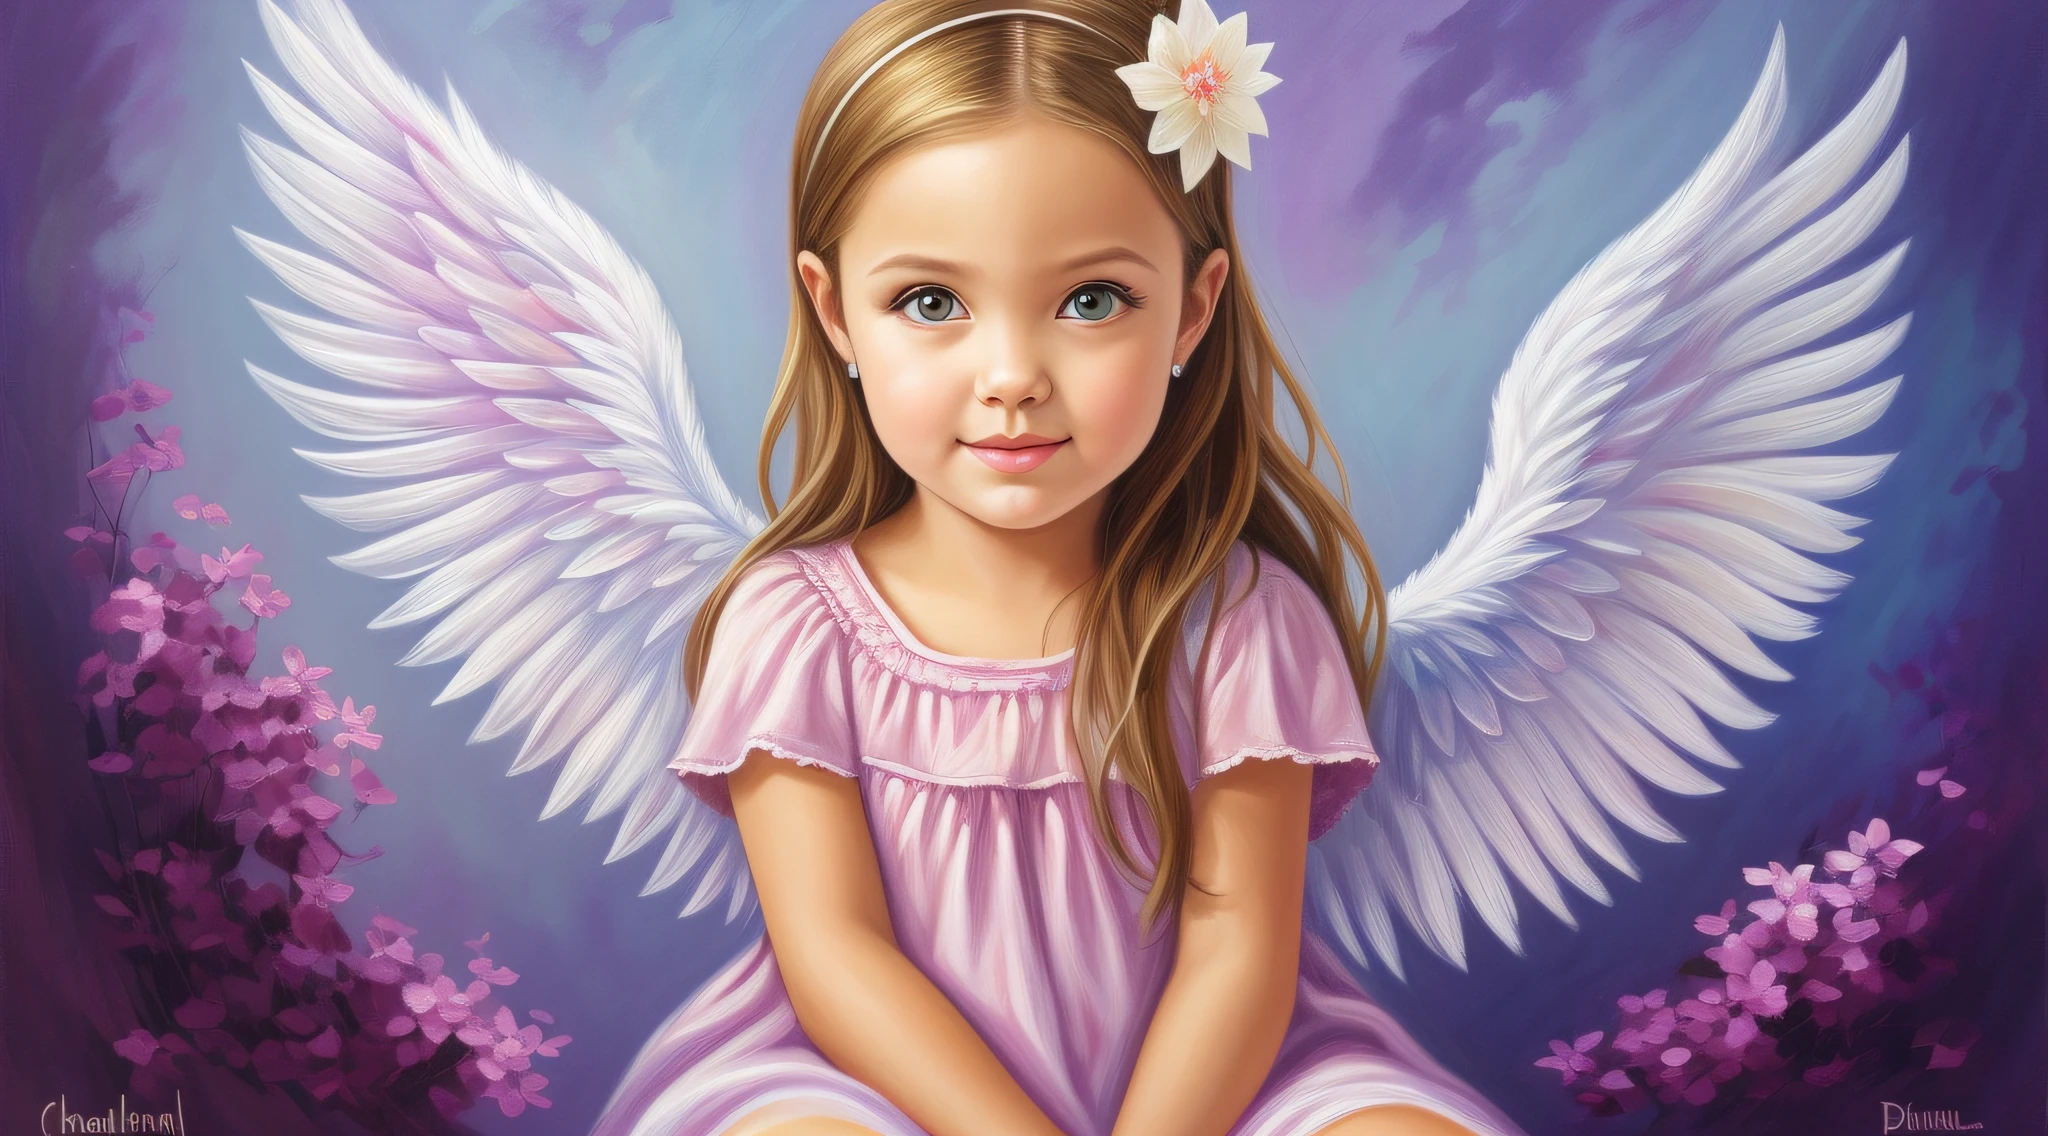 painting of a  with ángel wings sitting on a cloud, beautiful ángel, of beautiful ángel, of an beautiful ángel girl, portrait of a beautiful ángel, ángel girl, adorable pintura digital, beautiful ángel girl portrait, ángel, ángel-themed, querubín, full of paintings of ángels, ángelic face, ángelical, ángel face, beautiful female ángel, ángels --auto --s2